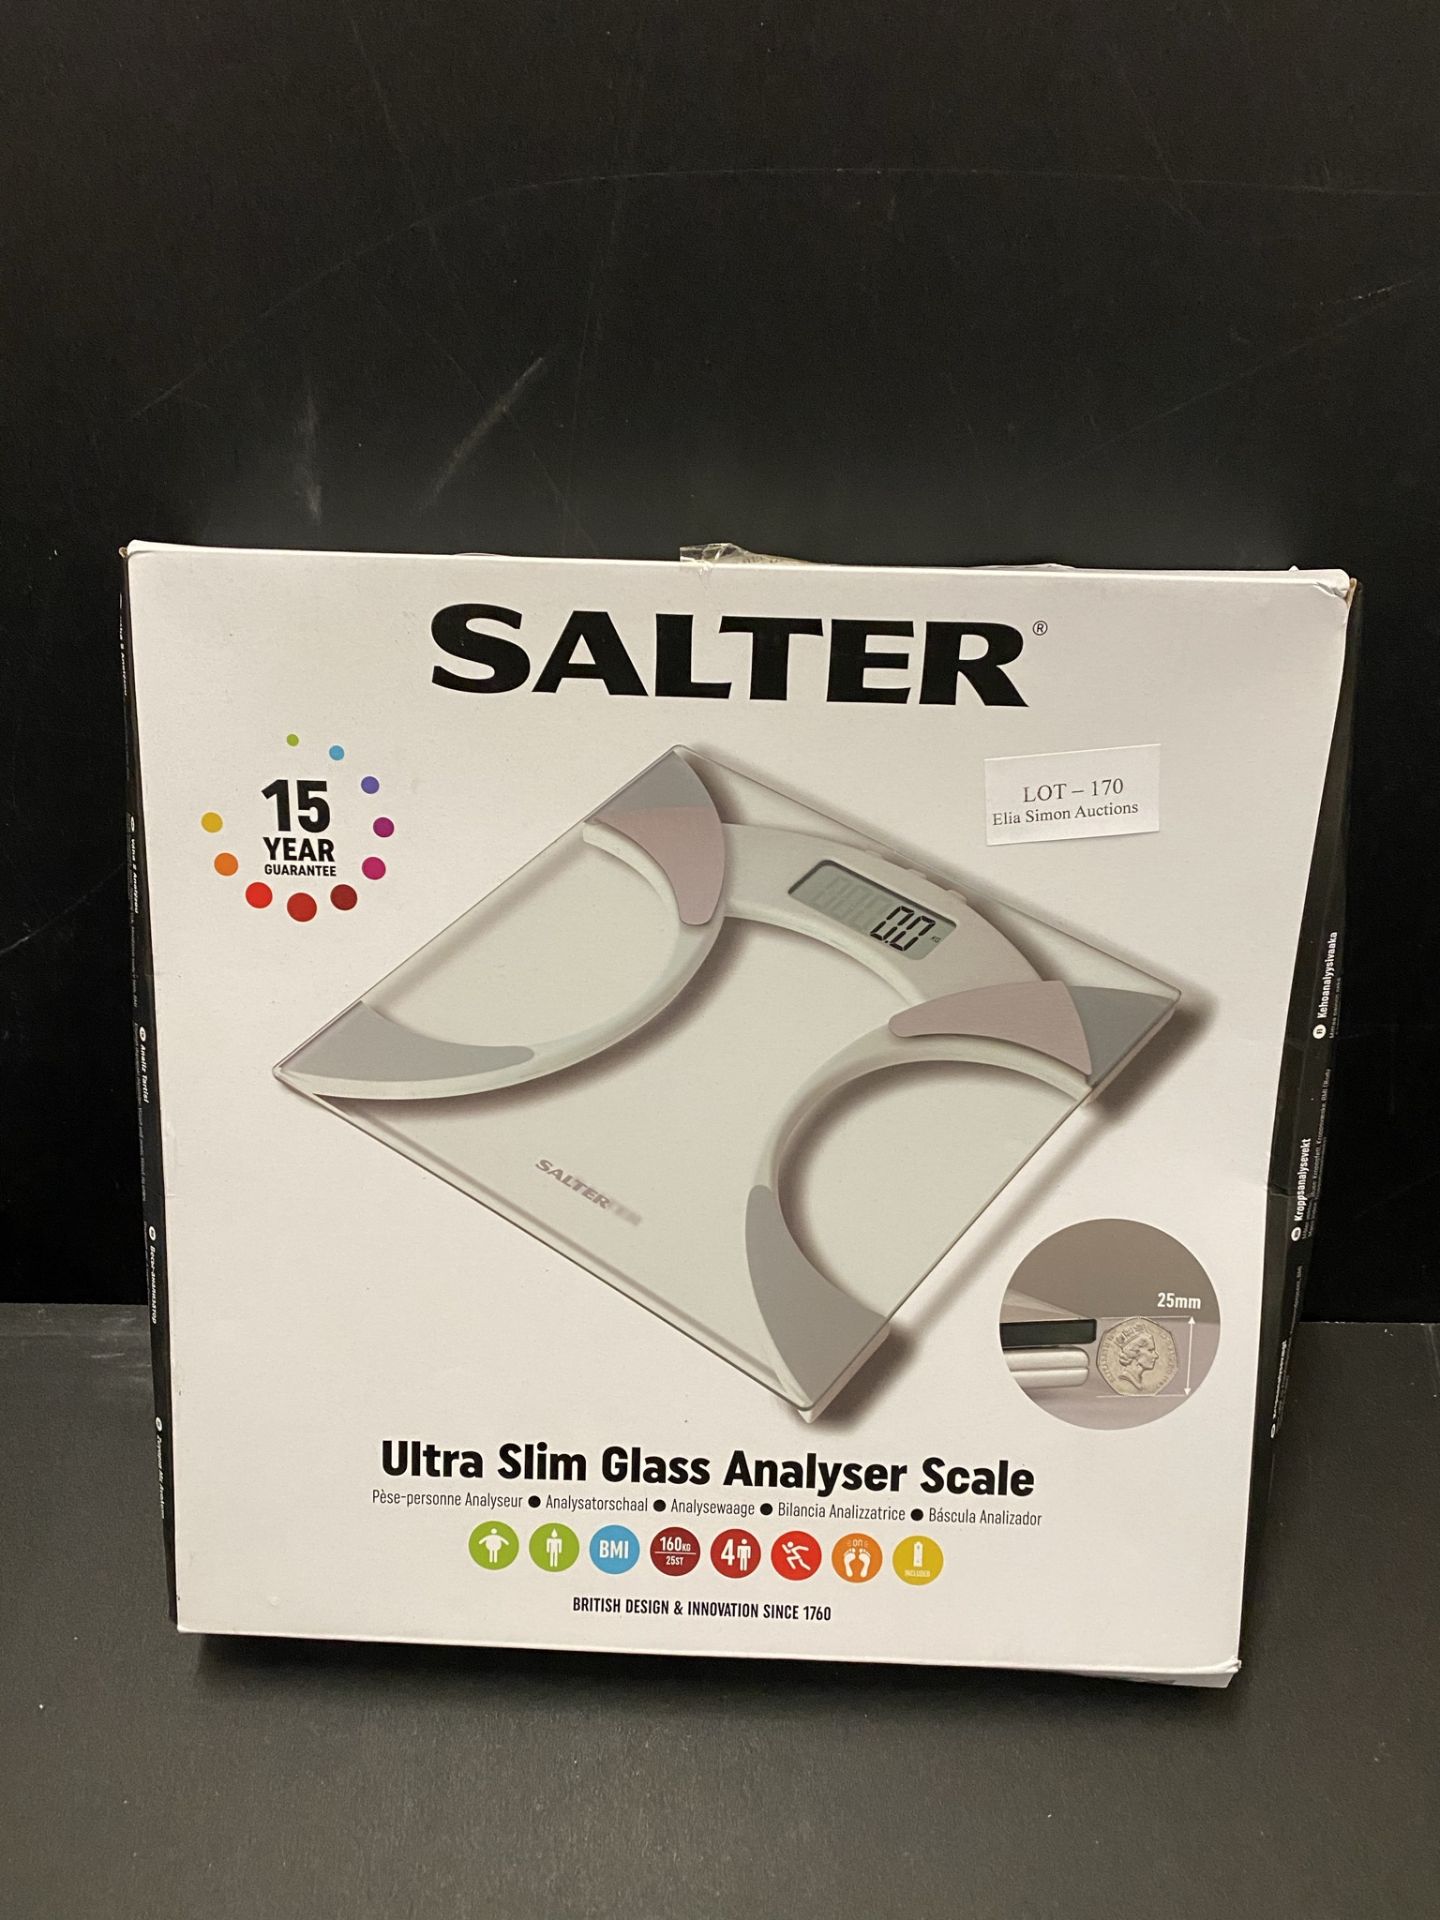 Salter Ultra Slim Analyser Bathroom Scales, Measure Weight BMI BMR Body Fat Percentage Body Water, S - Image 2 of 2